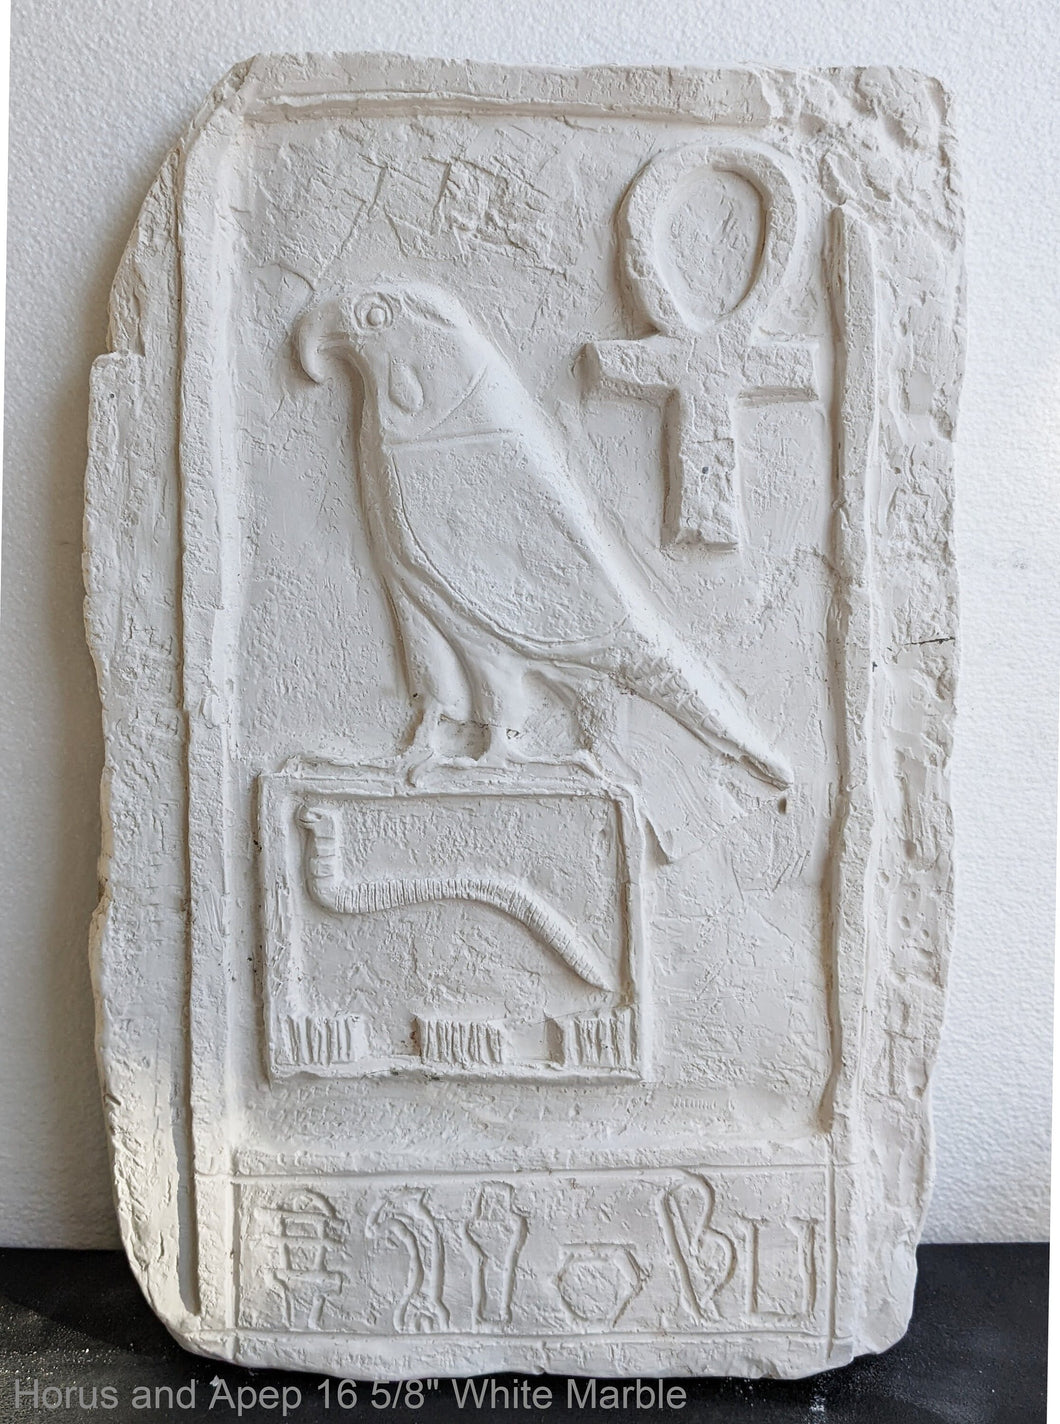 Egyptian Horus & Apep Sculptural wall plaque reproduction www.NEO-MFG.com 16 5/8